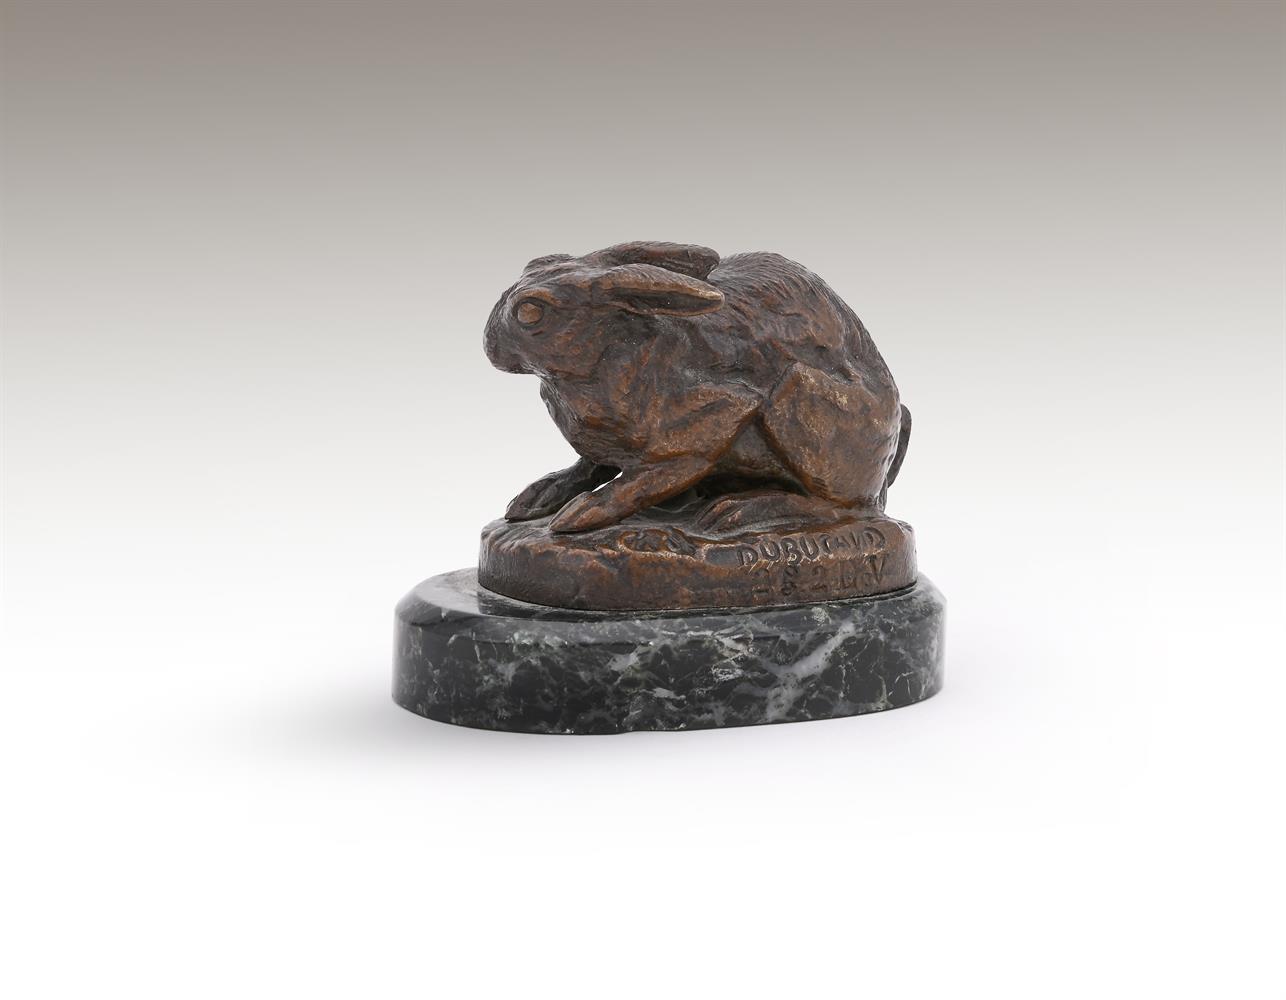 ALFRED DUBUCAND (FRENCH, 1828-1894), A BRONZE MODEL OF A CROUCHING HARE - Image 4 of 4